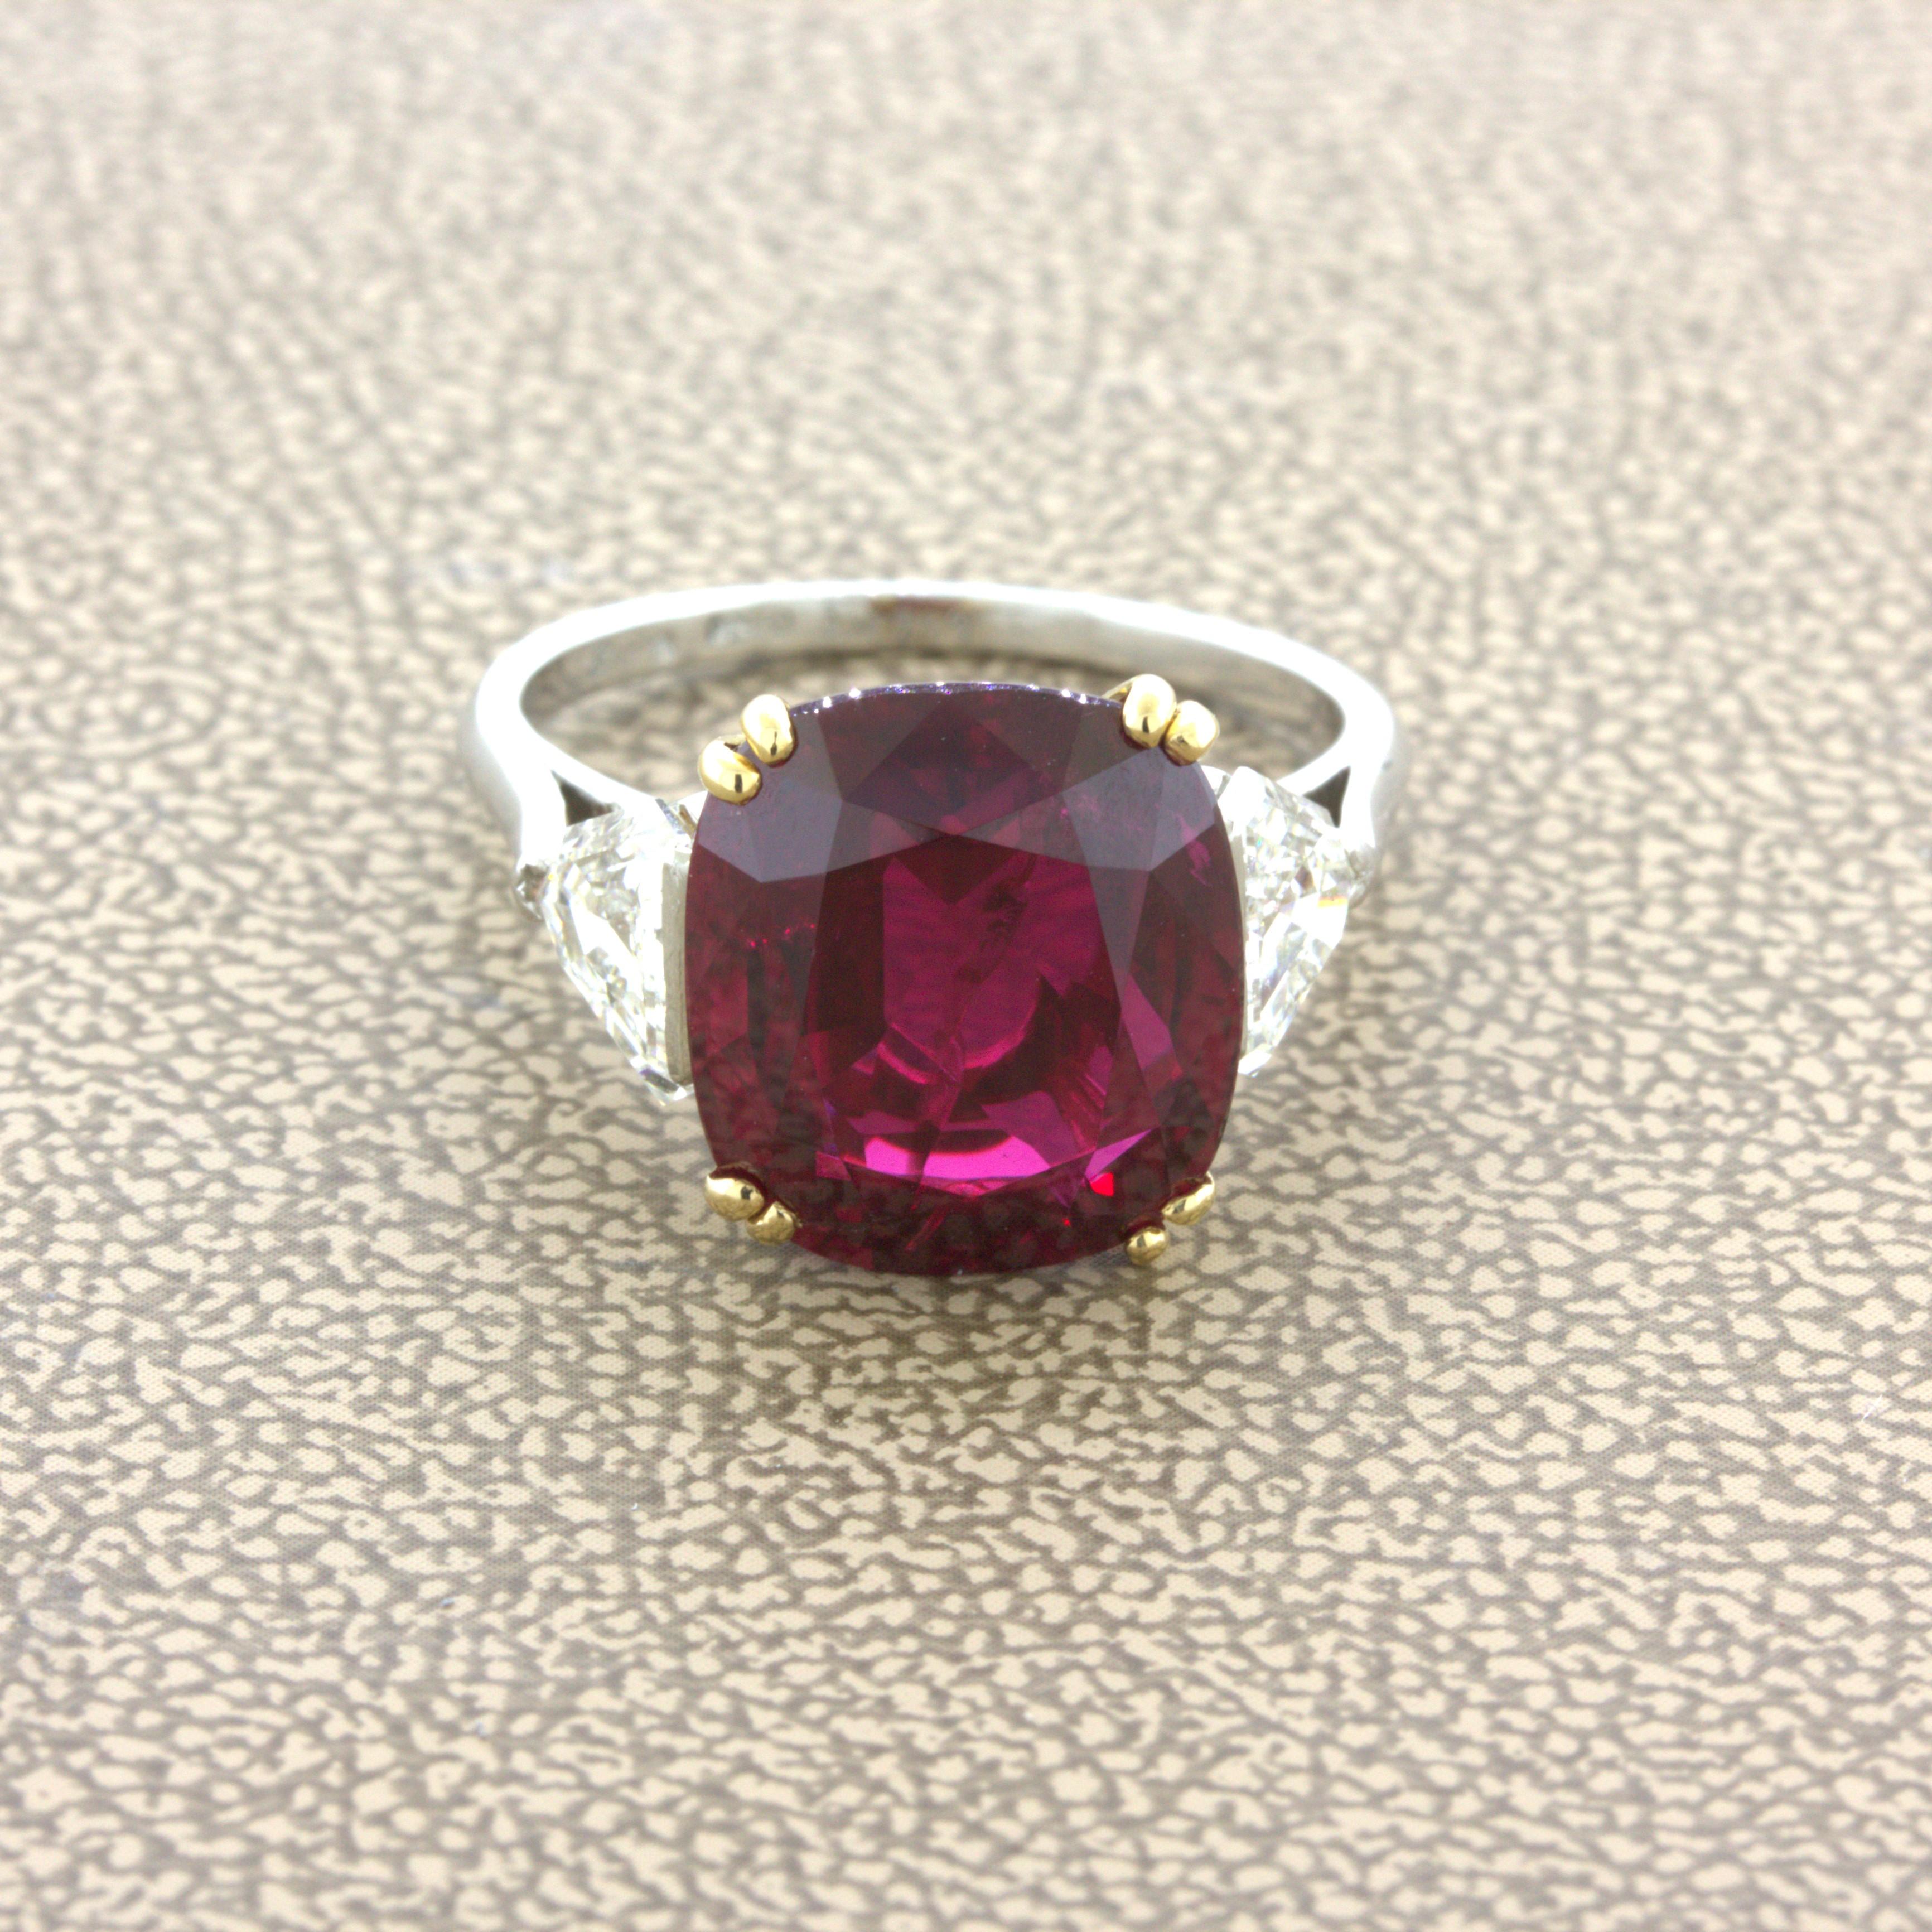 An extremely rare and important gemstone ring by Bvlgari. It features an incredible ruby weighing an astonishing 8.23 carats. What makes the gem so special is the combination of its large size, 8.23 carats, and its extremely fine quality. It has a